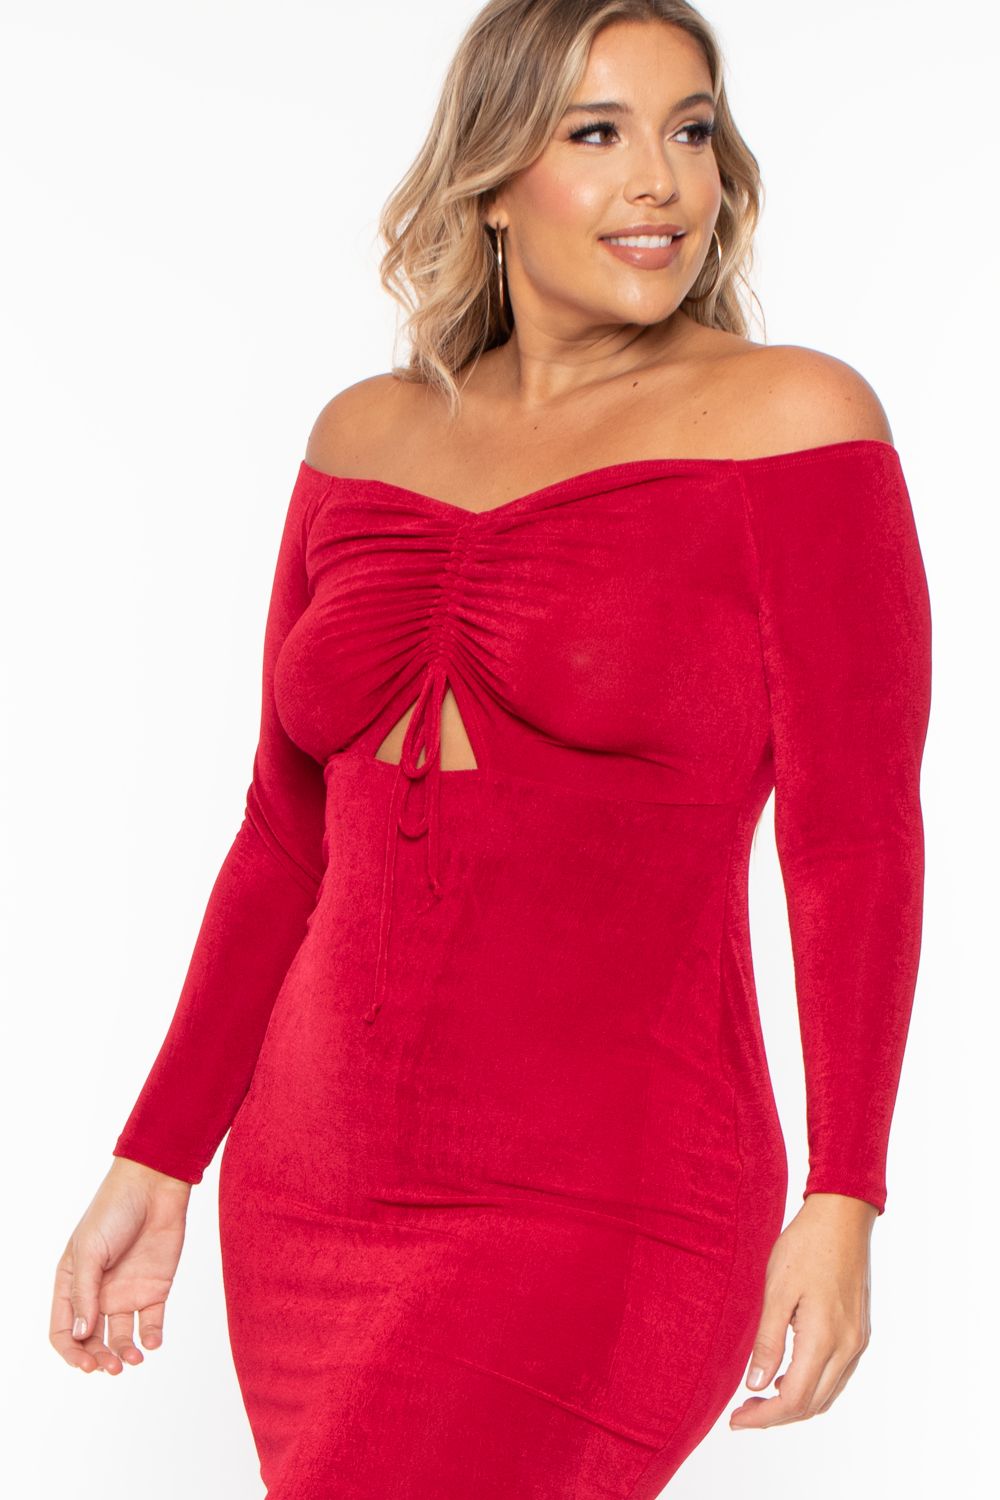 Plus Size Aveline Ruched Dress - Red